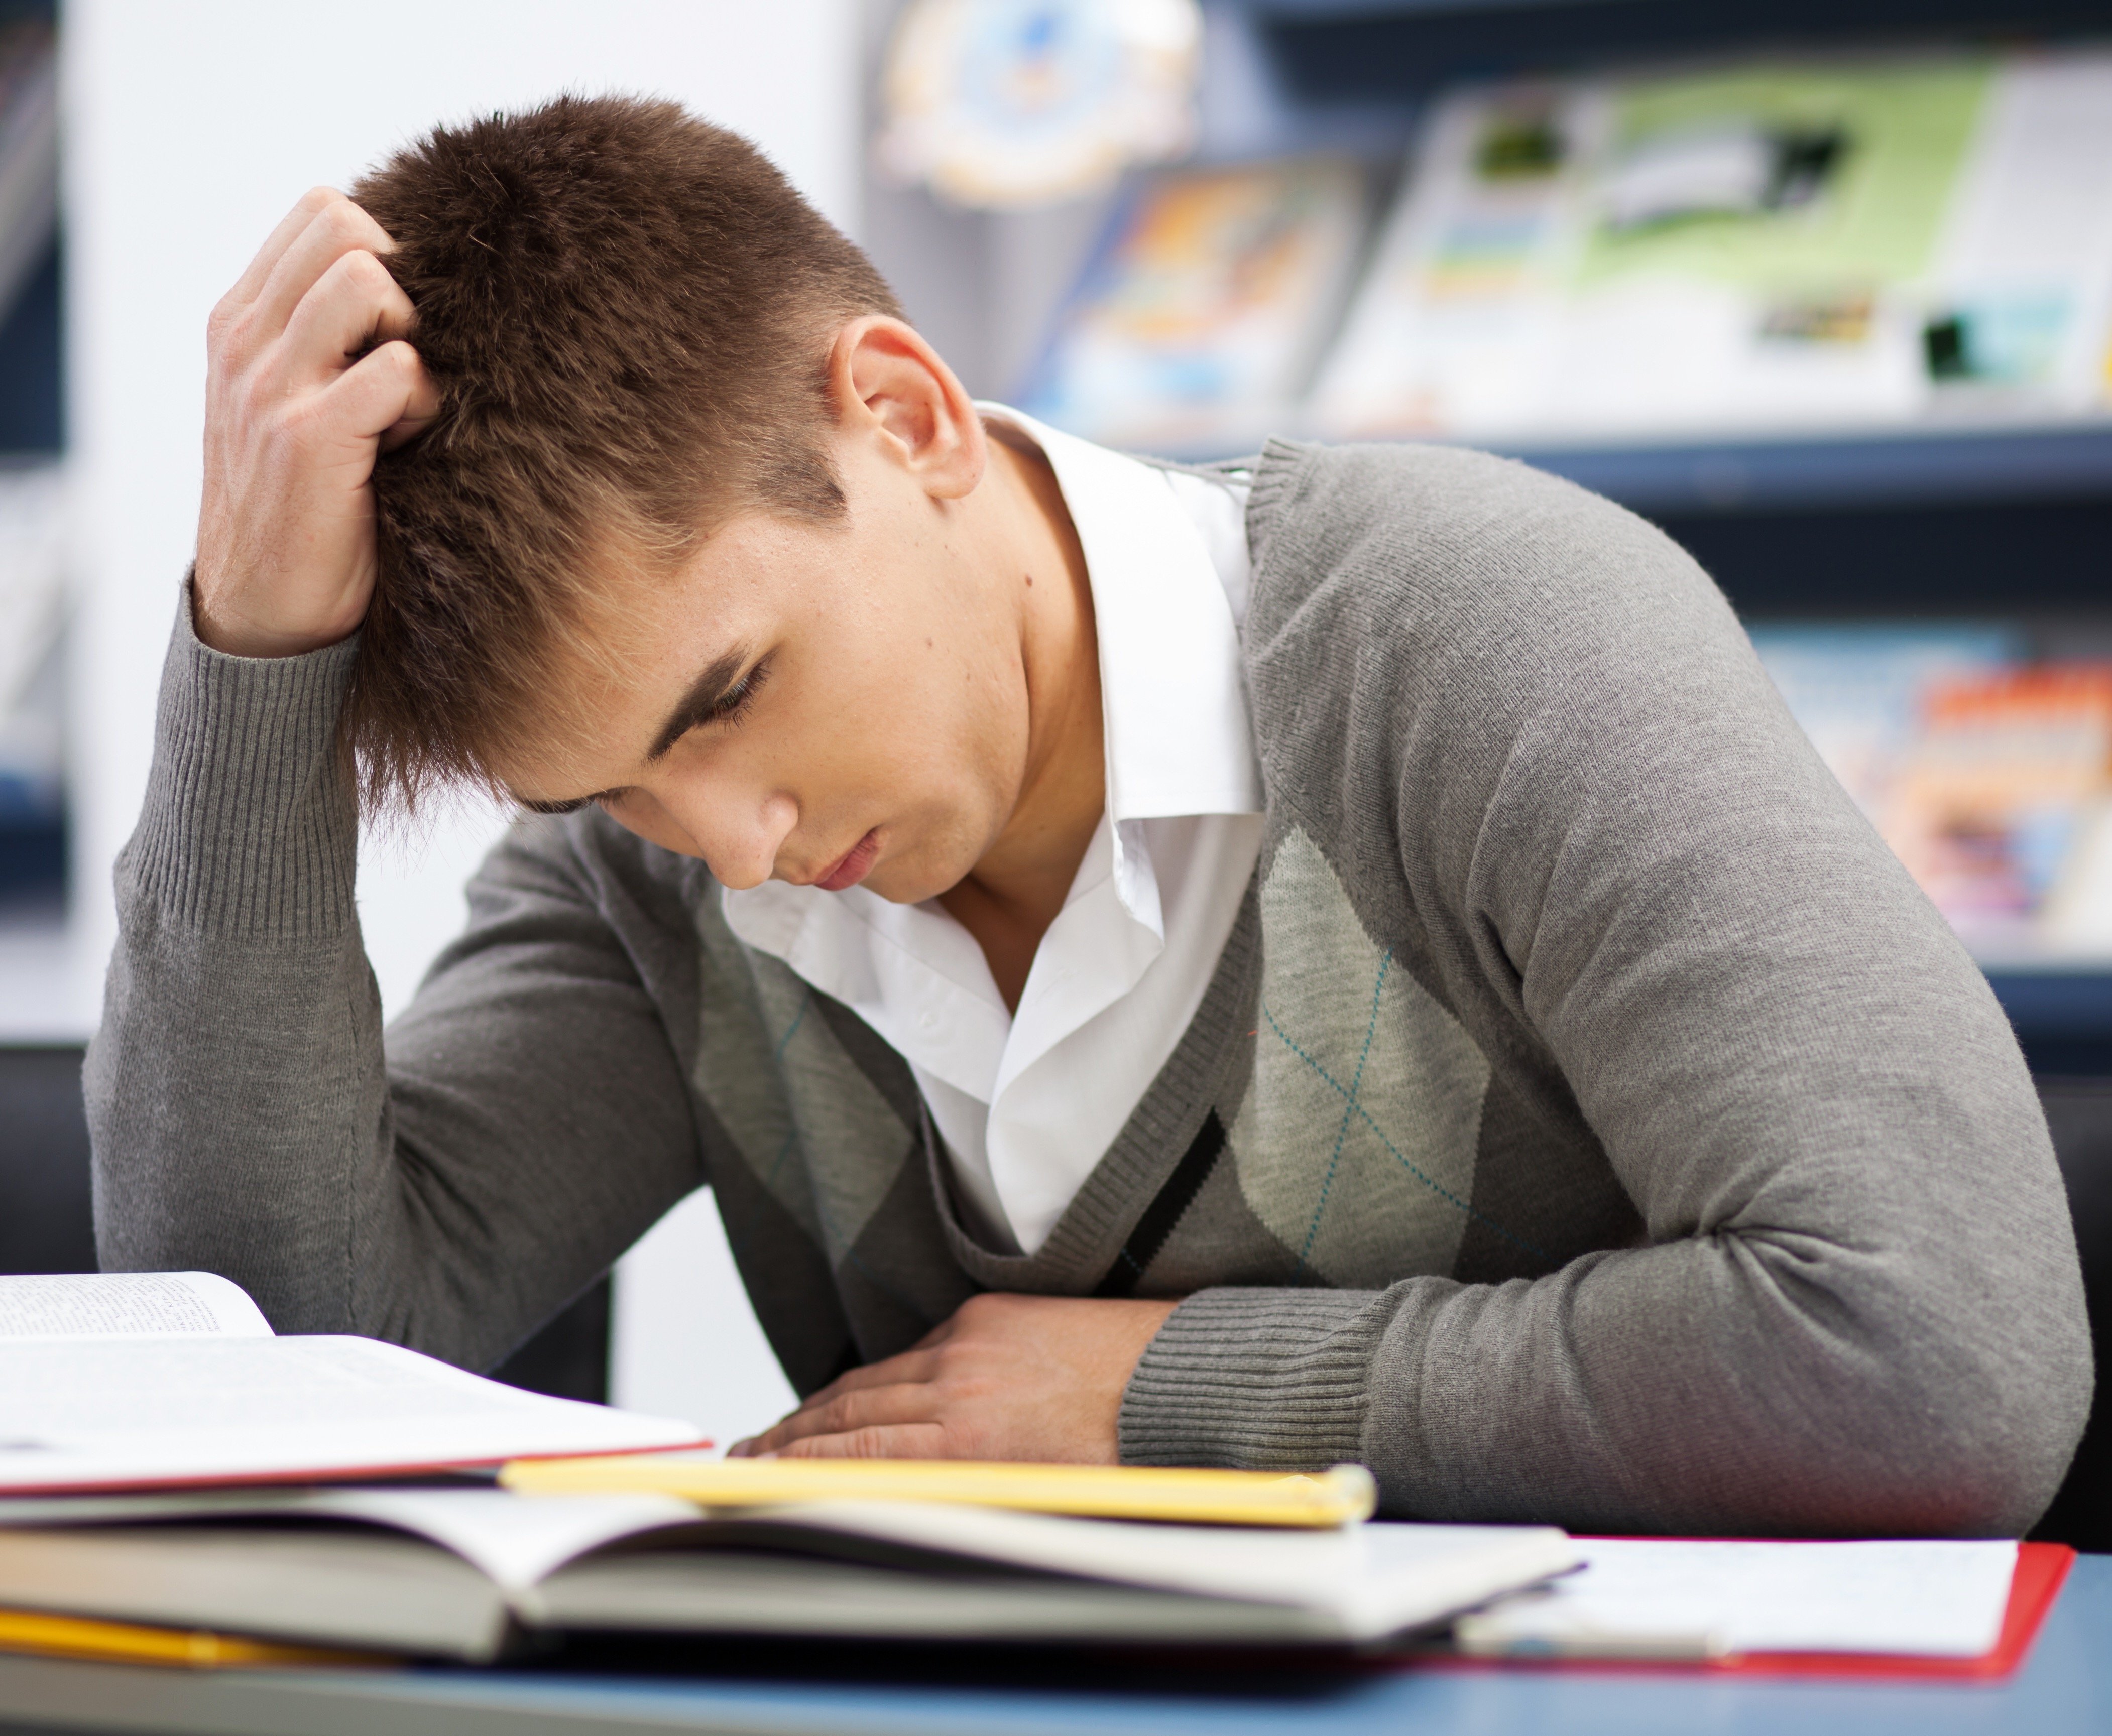 Top 3 Tips for Developing CollegeWorthy Study Habits